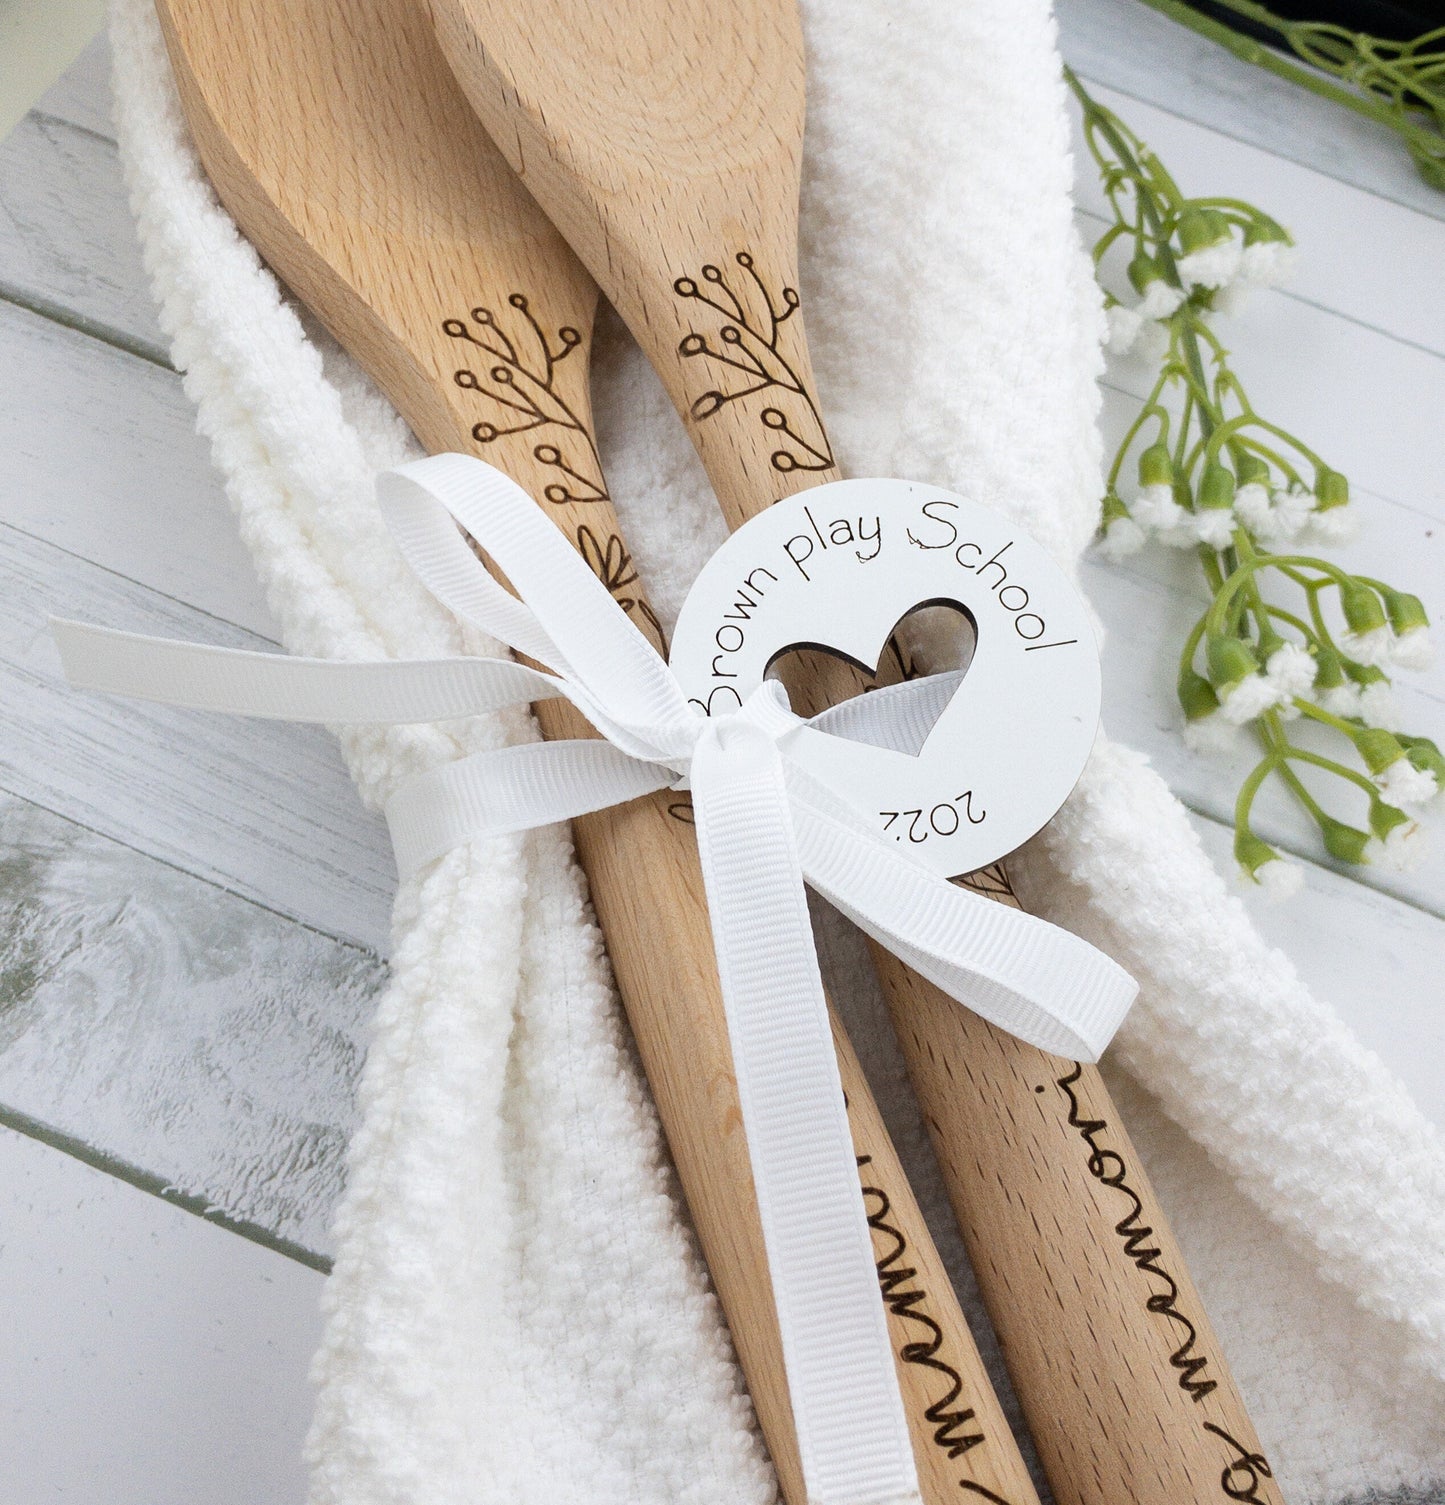 Personalized wooden favor tags